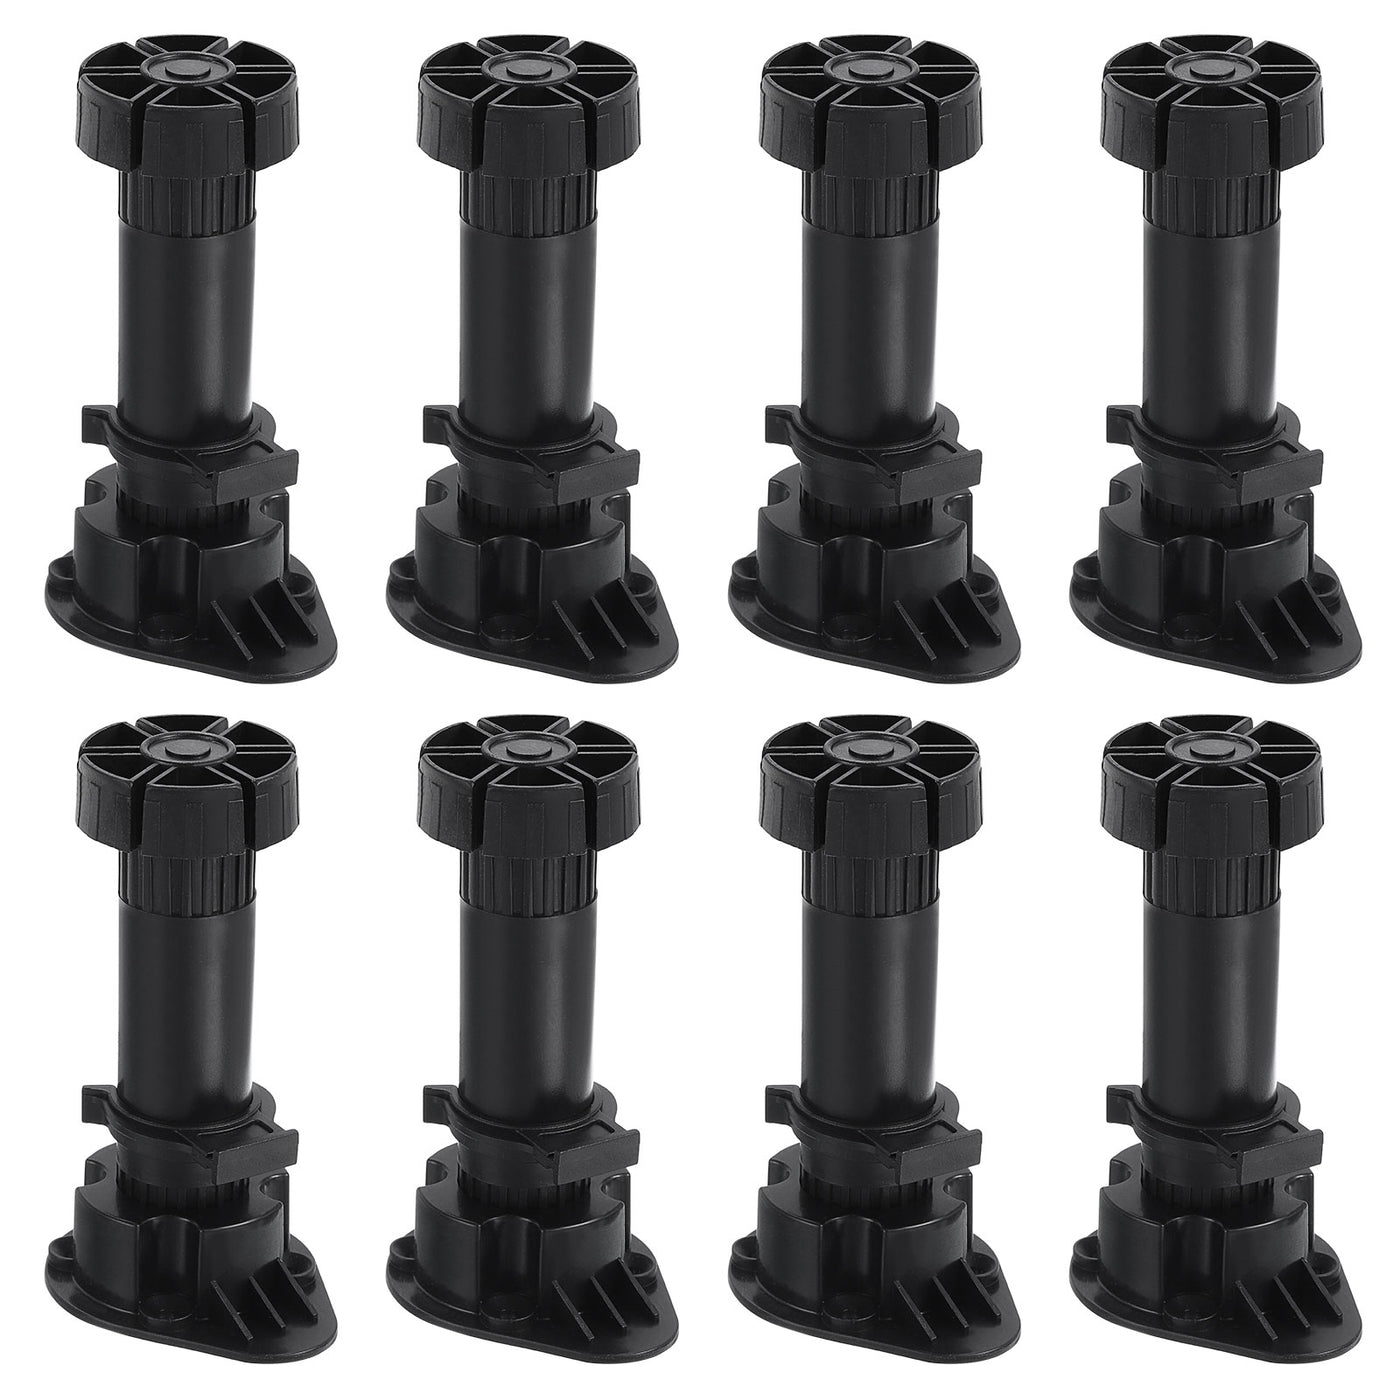 uxcell Uxcell Adjustable Legs, 8Pcs 44 x 120mm - Furniture Leveling Foot, Thick Thin Legs Leveler Support Frame for Bed Sofa Coffee Table Bathroom Cabinet (Black)